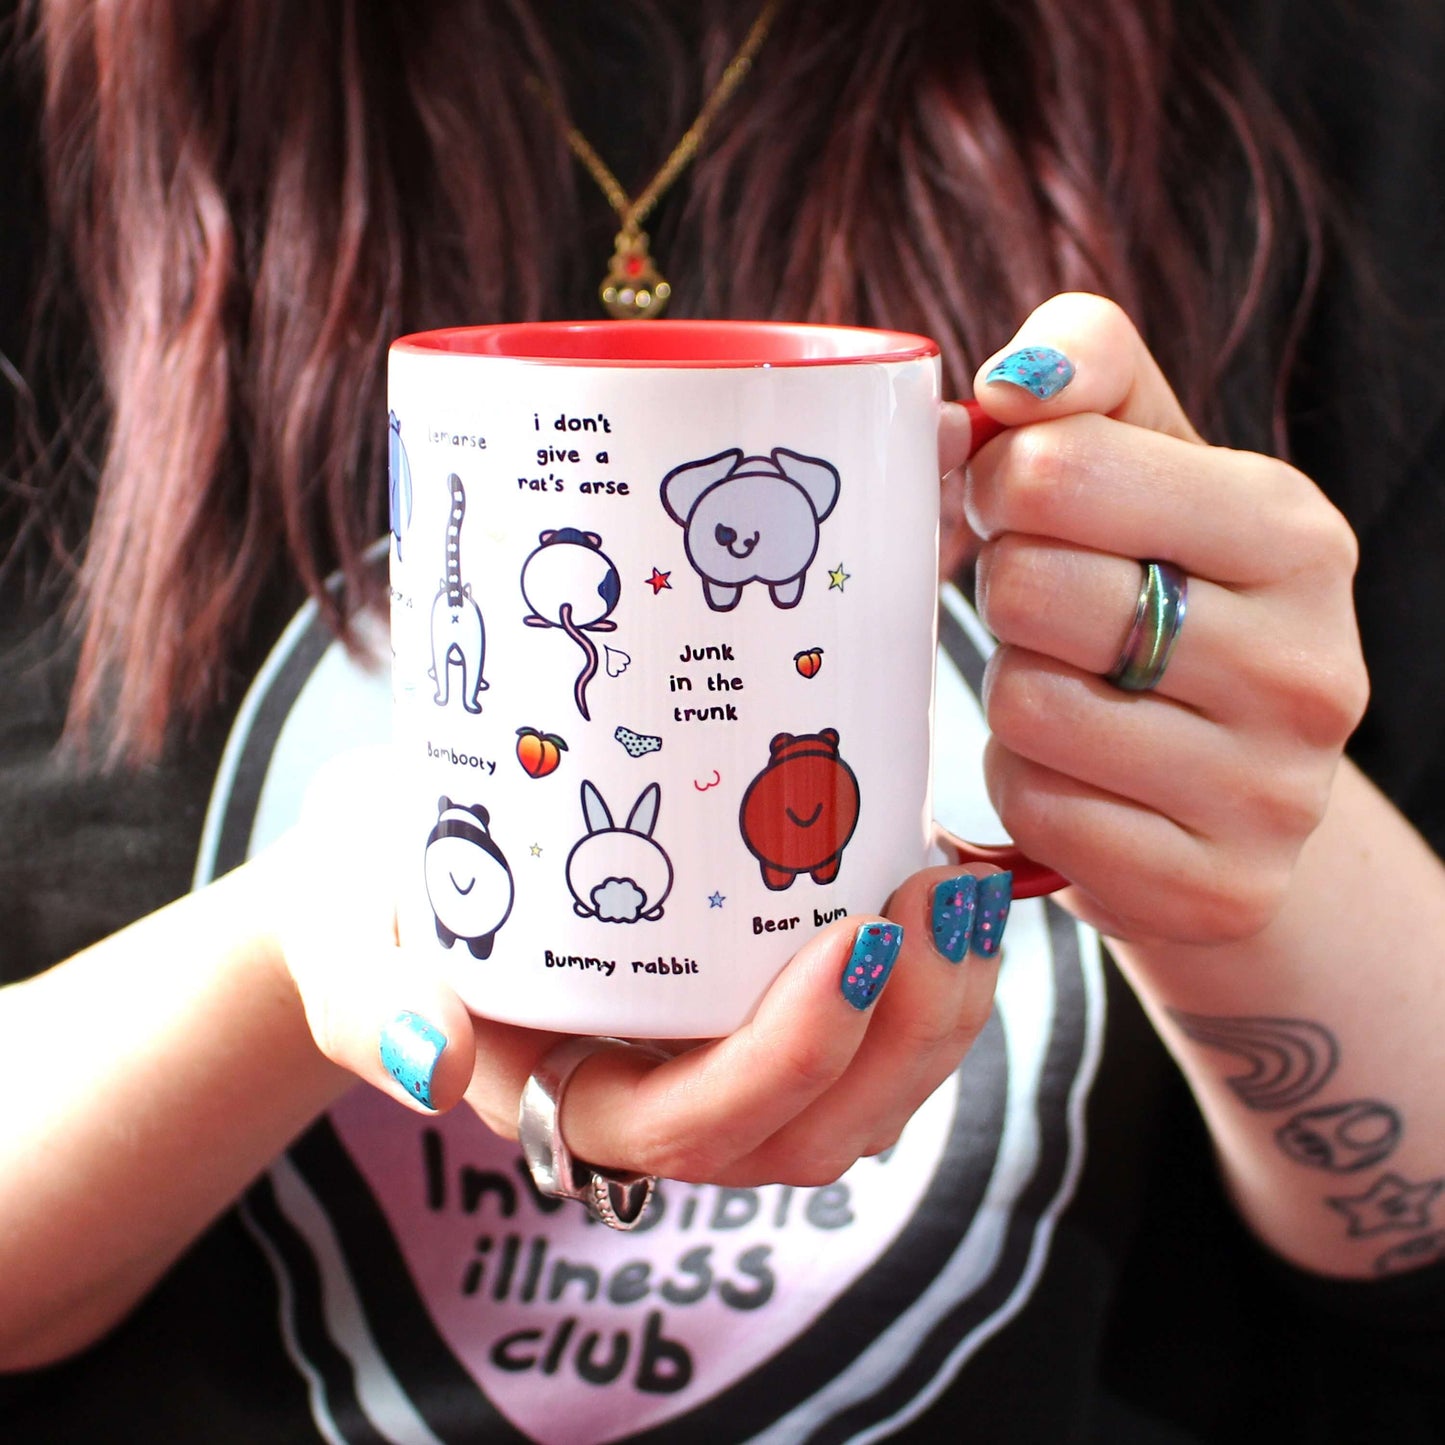 The Can't Be Arsed Mug being held up by Nikky Box with brown hair and blue nail varnish wearing the invisible illness black sweater. The white mug with a red handle and inside features various animal bums with underwear, chest outlines, peaches and multicoloured stars. The mug is facing left which shows hippo - hippobottomus, alpaca - alpacass, panda - bambooty, lemur - lemarse, rat - I don't give a rat's arse, bunny rabbit - bummy rabbit, elephant - junk in the trunk and bear - bear bum bums.